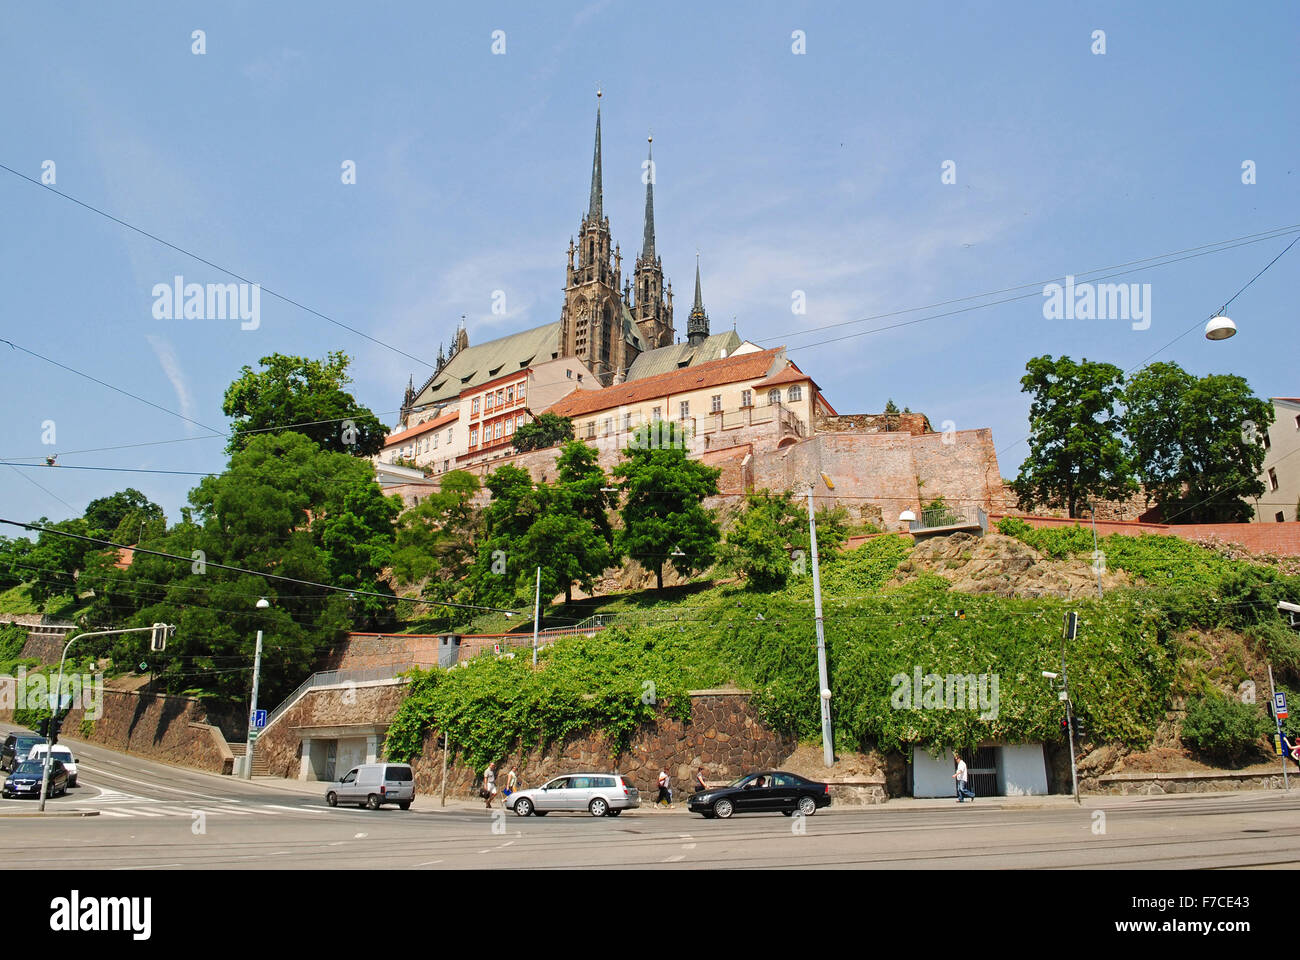 The view of the Cathedral of Saint Peter and Paul in Brno, Czech Republic. Stock Photo